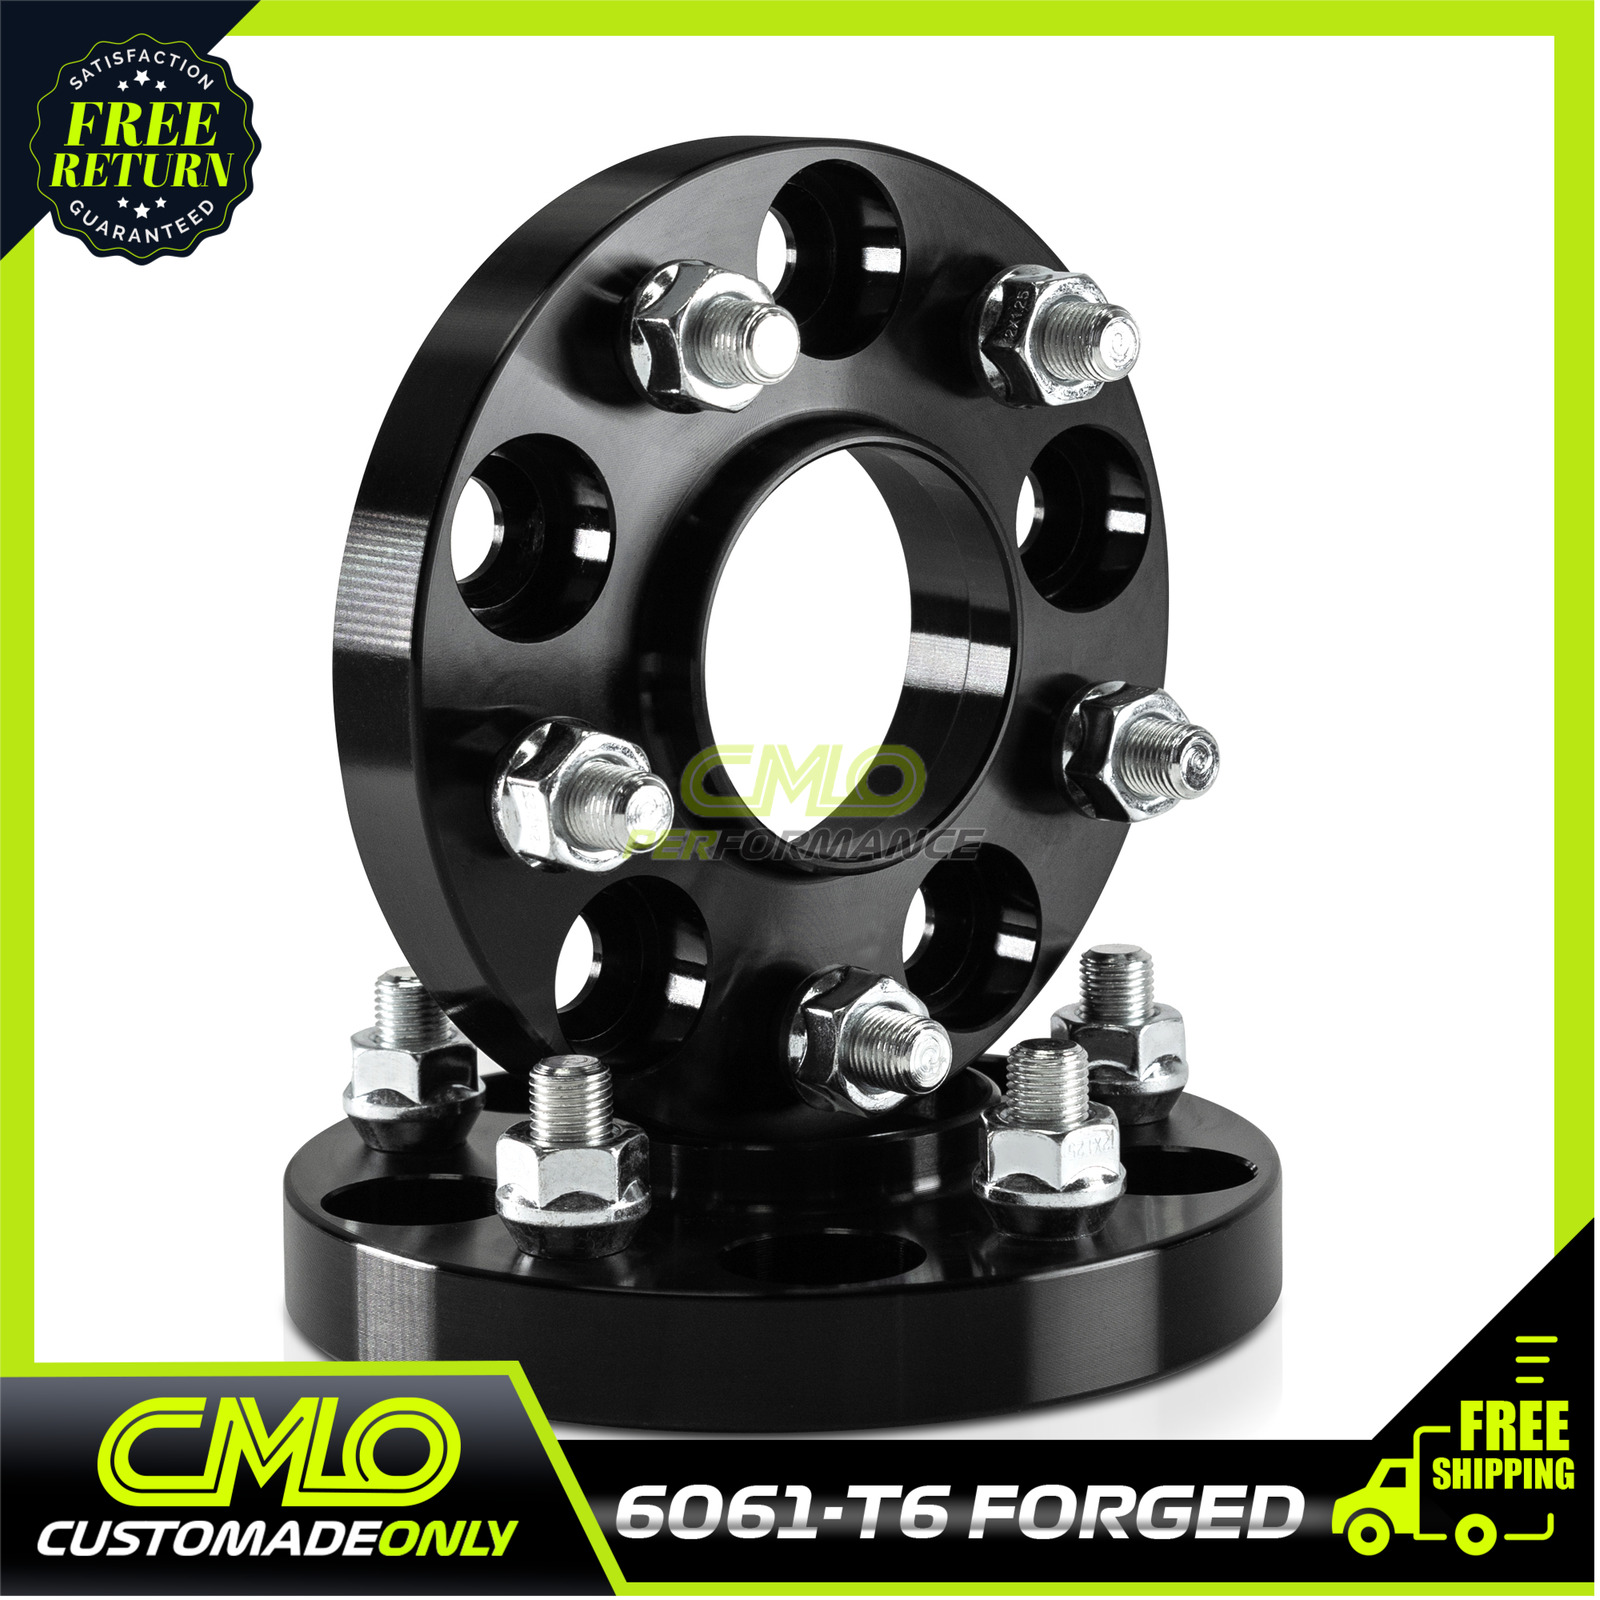 2pc 20mm Black Wheel Spacers 5x4.5 For IS250 IS300 IS350 GS300 GS350 GS460 Camry